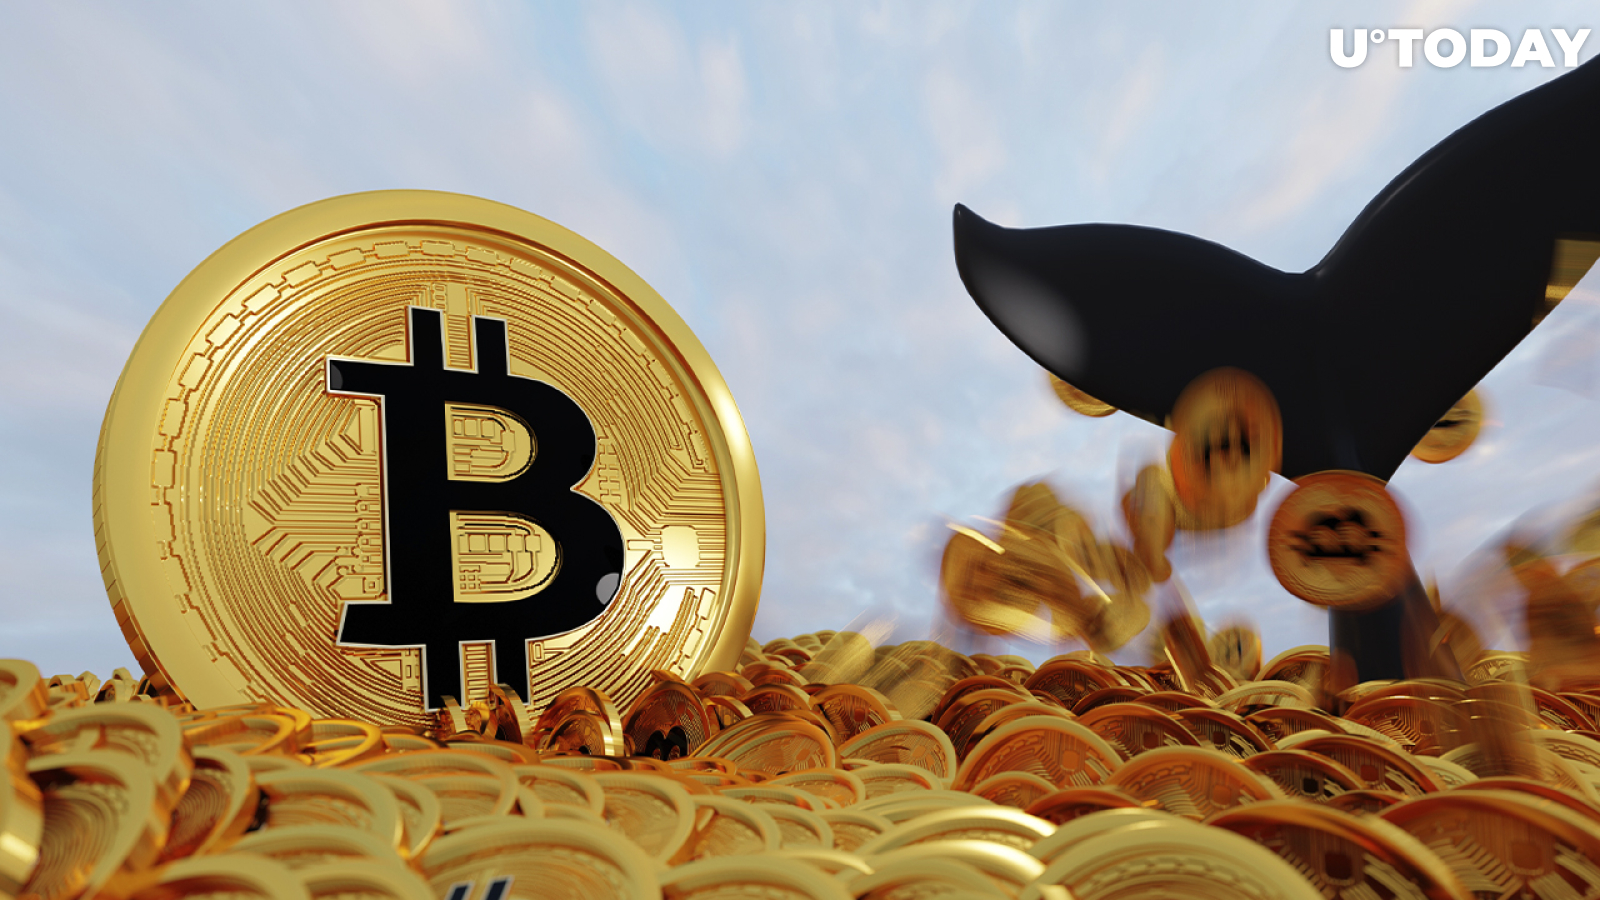 Bitcoin Whales Become More Active with Number of Transactions Greater Than $1 Million Rising